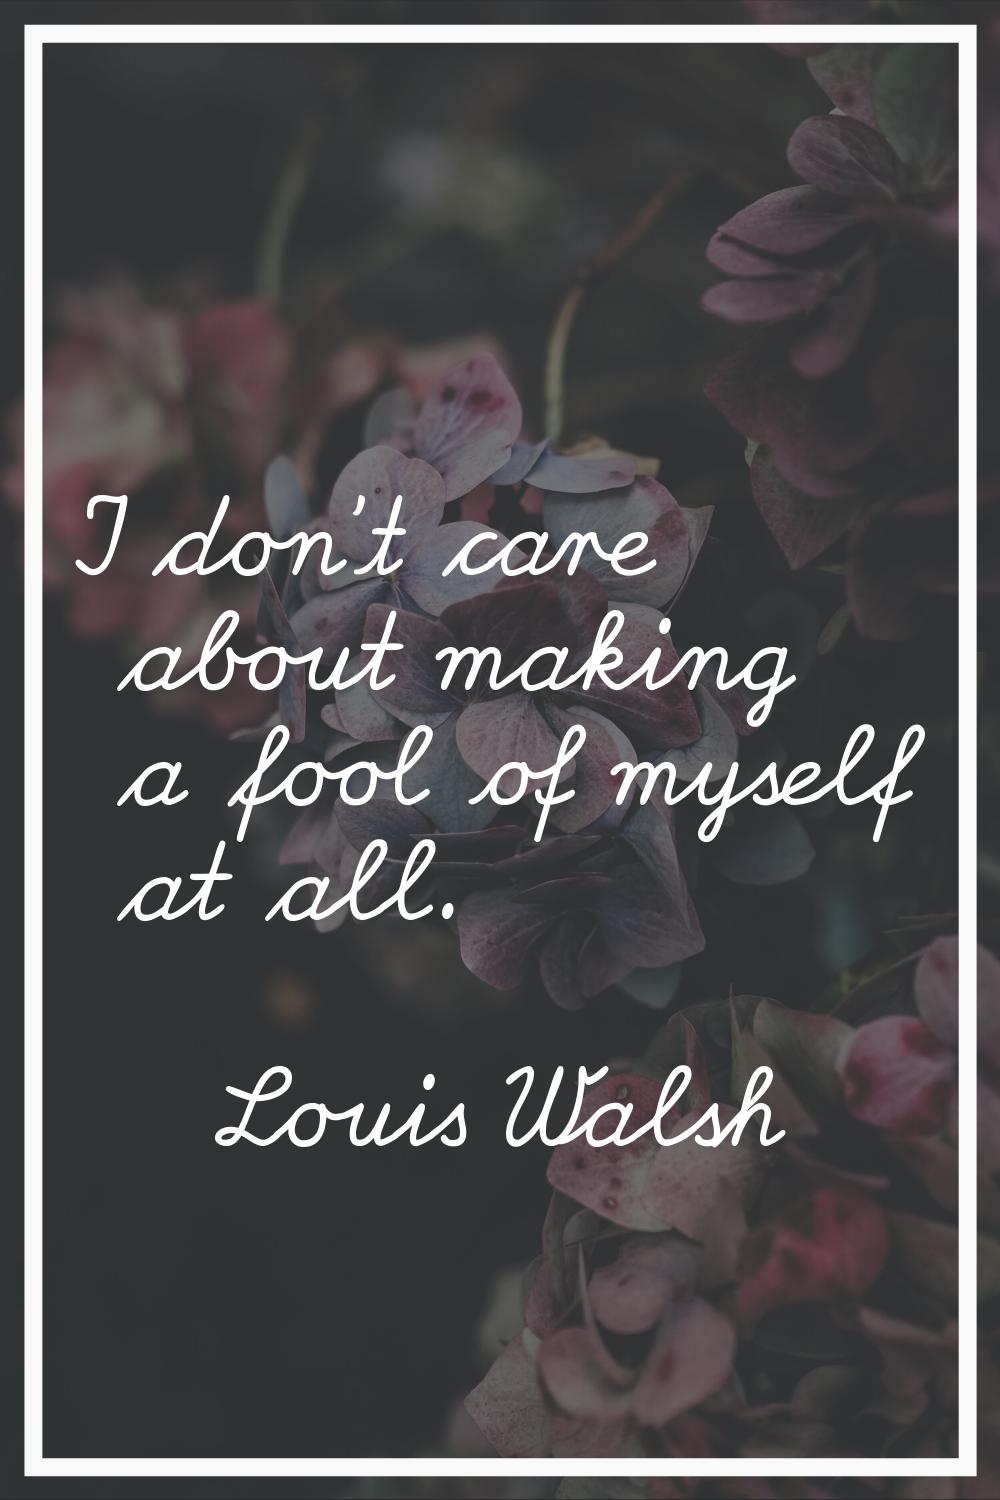 I don't care about making a fool of myself at all.